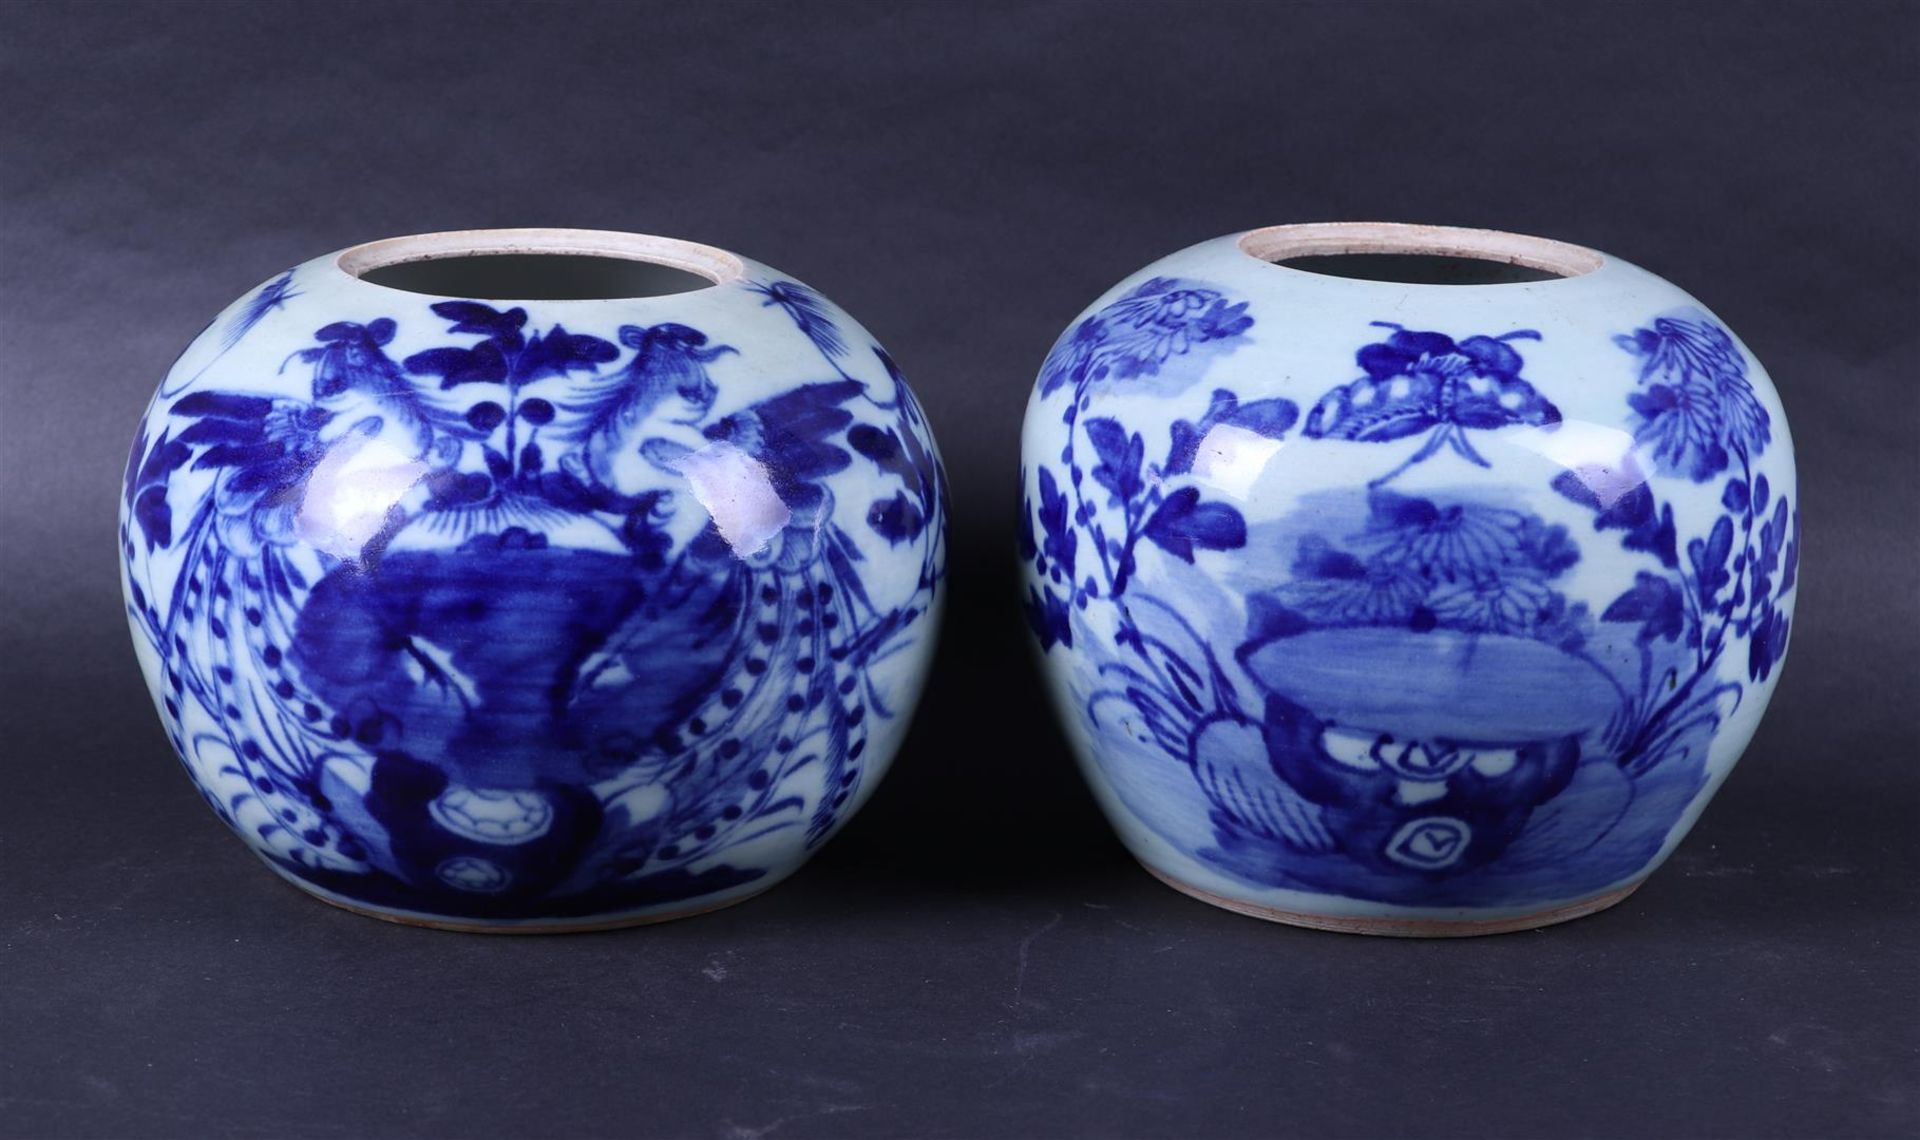 Two porcelain storage jars with floral decor. China, late 19th century
